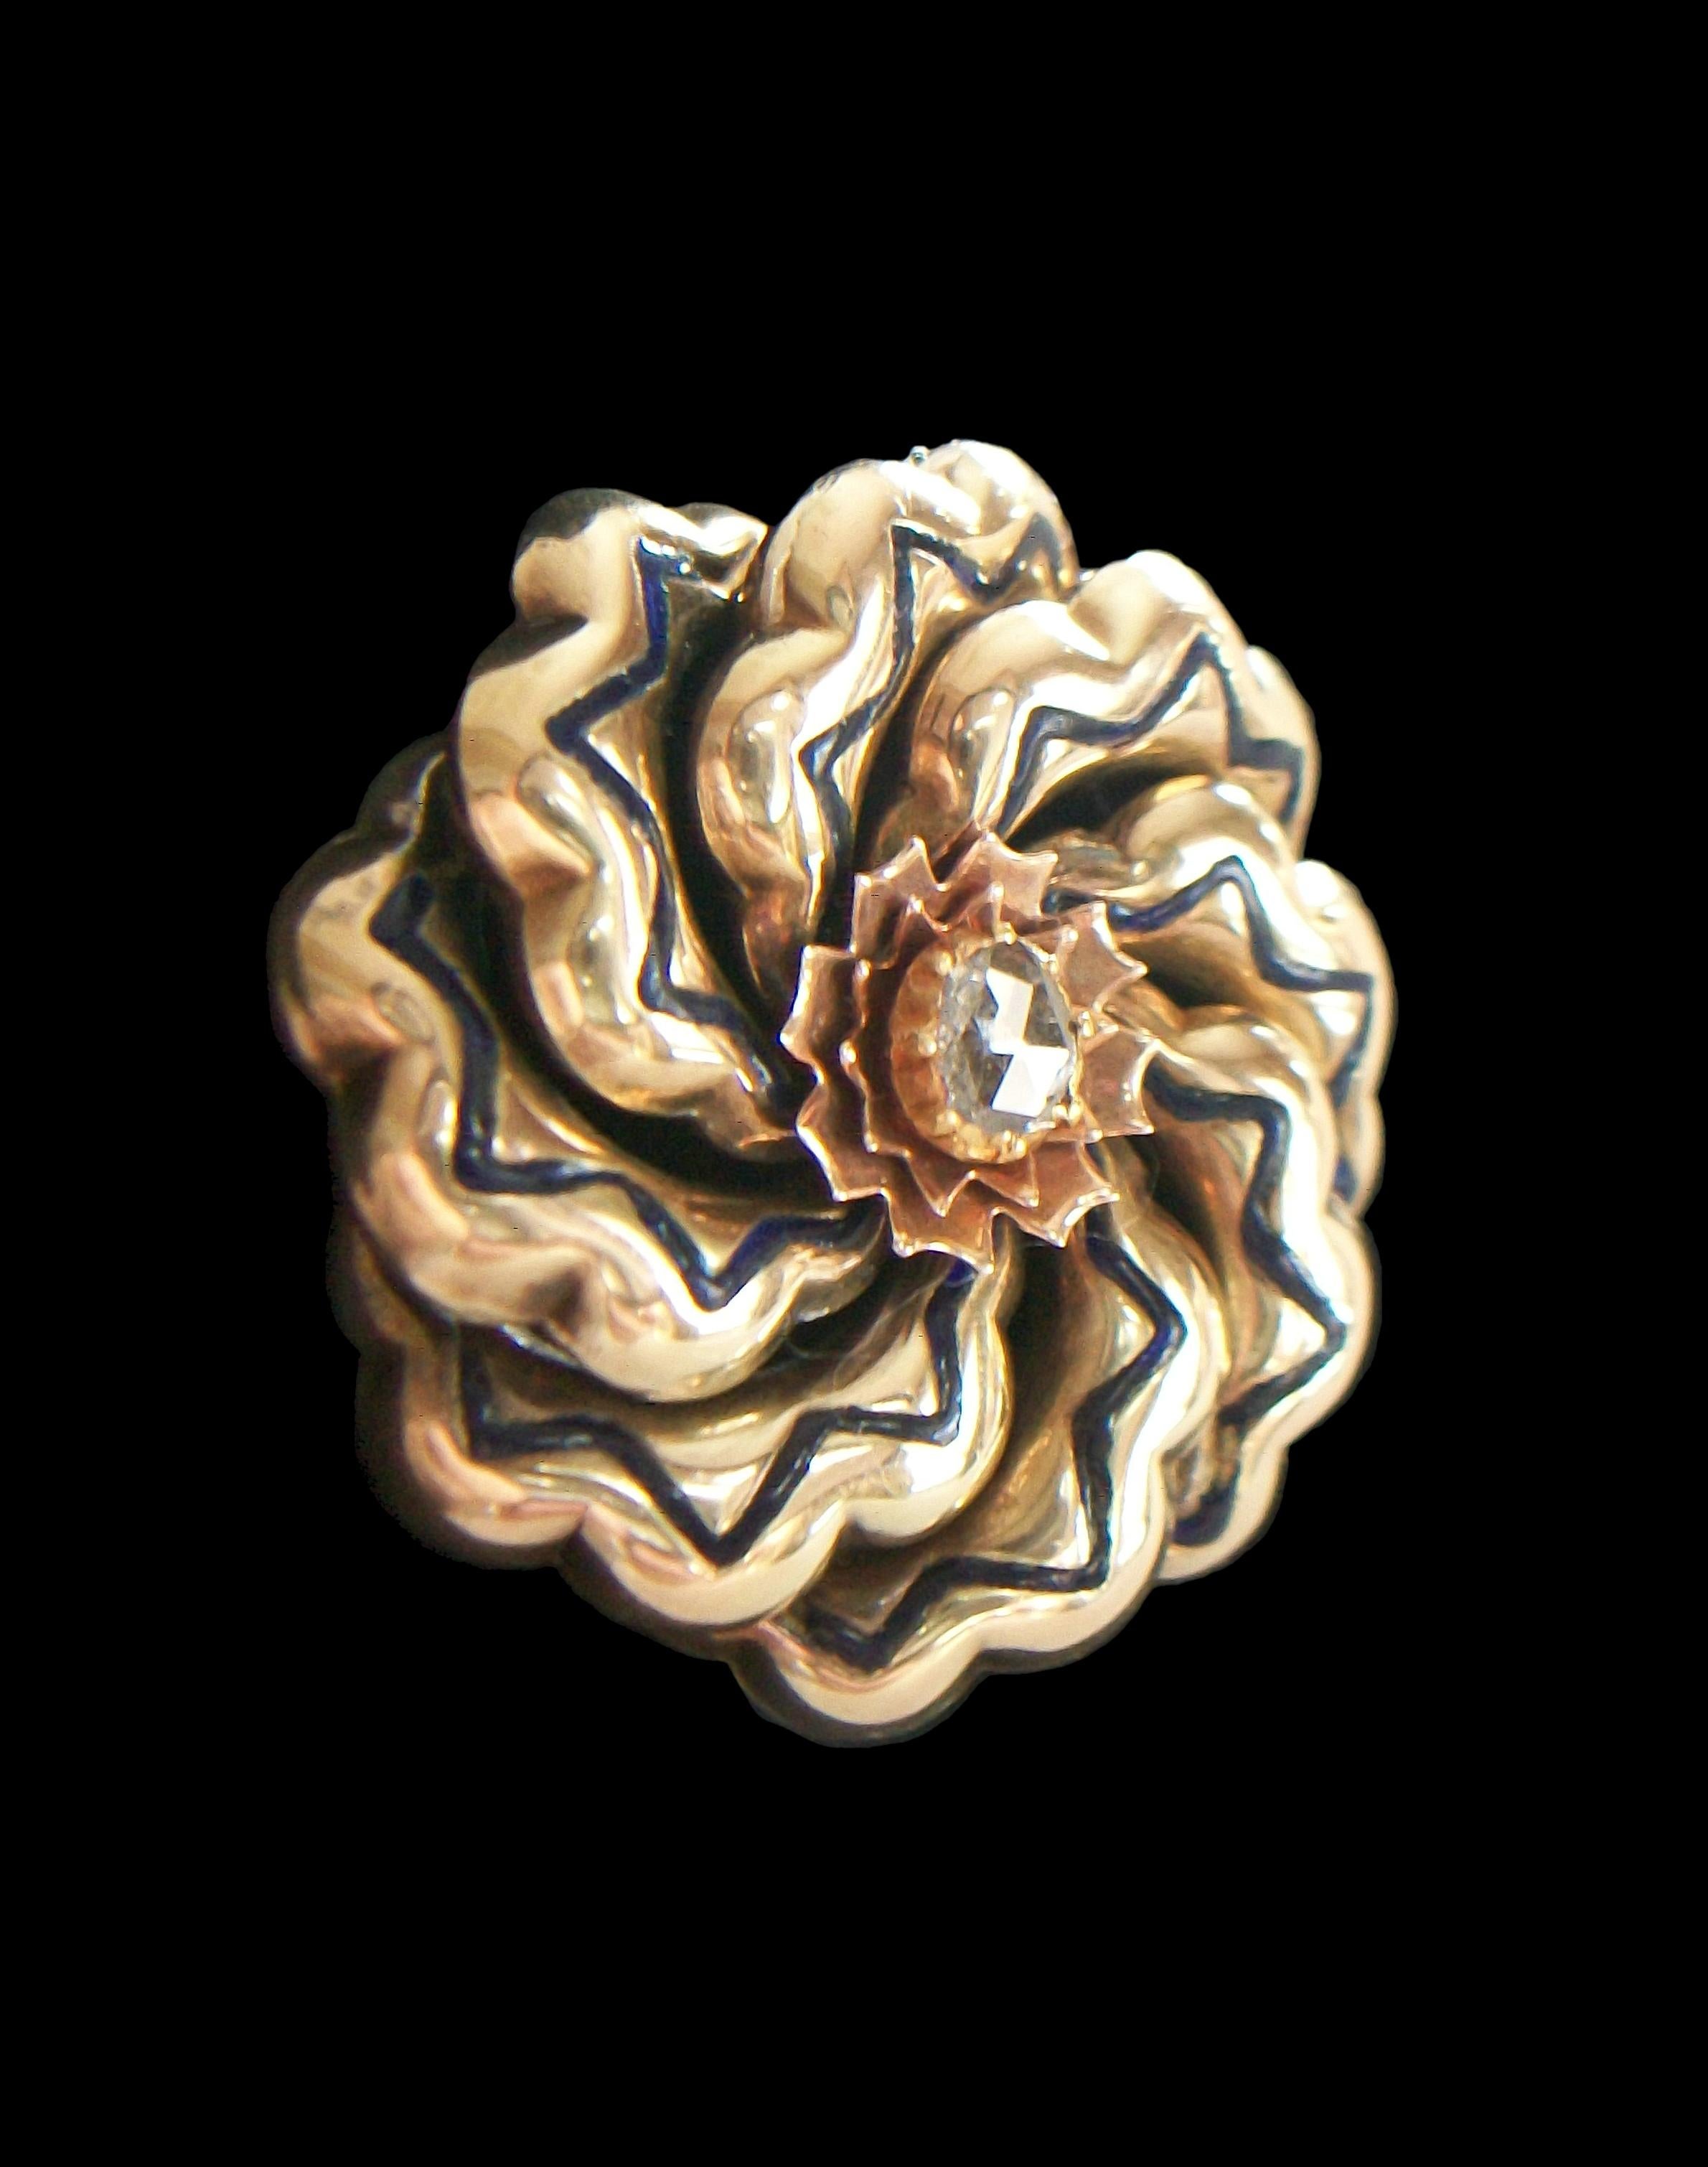 Antique Victorian 14K yellow and rose gold with enamel, stylized floral infinity brooch - clawed collet set rose cut diamond to the center (6 mm. x 5 mm. - approximate) surrounded by rose gold 'petals' - eight spiraling arms with inset zigzag black